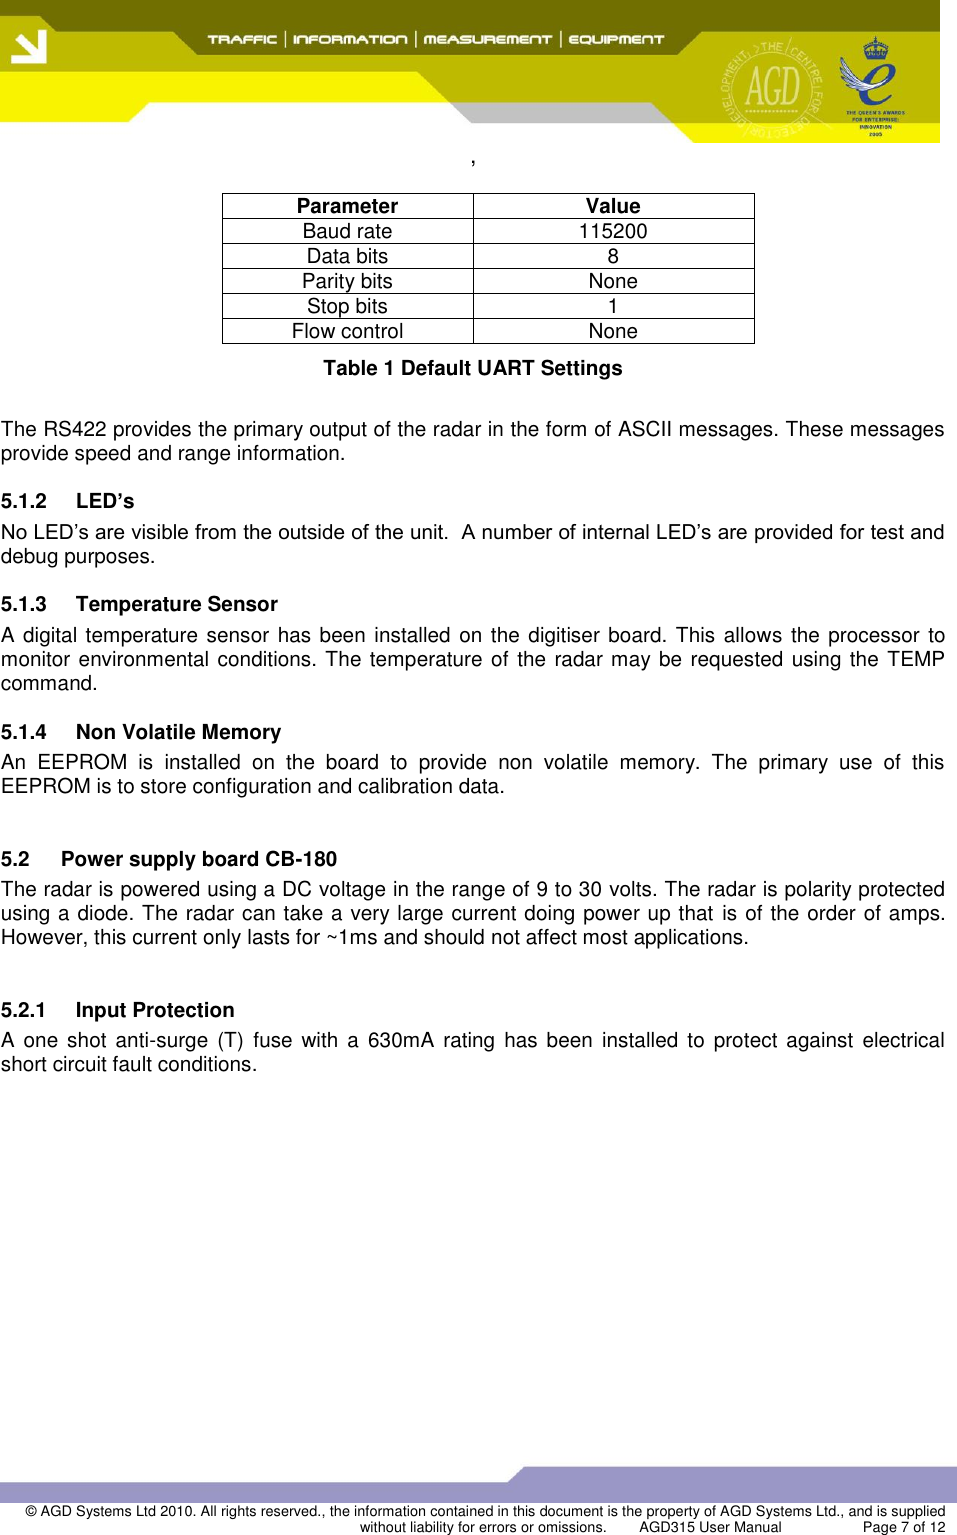  ,  © AGD Systems Ltd 2010. All rights reserved., the information contained in this document is the property of AGD Systems Ltd., and is supplied without liability for errors or omissions.   AGD315 User Manual                    Page 7 of 12    Parameter Value Baud rate 115200 Data bits 8 Parity bits None Stop bits 1 Flow control None Table 1 Default UART Settings  The RS422 provides the primary output of the radar in the form of ASCII messages. These messages provide speed and range information. 5.1.2  LED’s No LED’s are visible from the outside of the unit.  A number of internal LED’s are provided for test and debug purposes. 5.1.3 Temperature Sensor A digital temperature sensor  has been installed  on the digitiser board. This allows the processor to monitor environmental conditions. The temperature of the radar may be requested using the TEMP command. 5.1.4  Non Volatile Memory An  EEPROM  is  installed  on  the  board  to  provide  non  volatile  memory.  The  primary  use  of  this EEPROM is to store configuration and calibration data.   5.2  Power supply board CB-180 The radar is powered using a DC voltage in the range of 9 to 30 volts. The radar is polarity protected using a diode. The radar can take a very large current doing power up that  is of the order of amps. However, this current only lasts for ~1ms and should not affect most applications.  5.2.1  Input Protection A  one  shot  anti-surge  (T)  fuse with a  630mA rating  has  been  installed  to  protect  against  electrical short circuit fault conditions.  